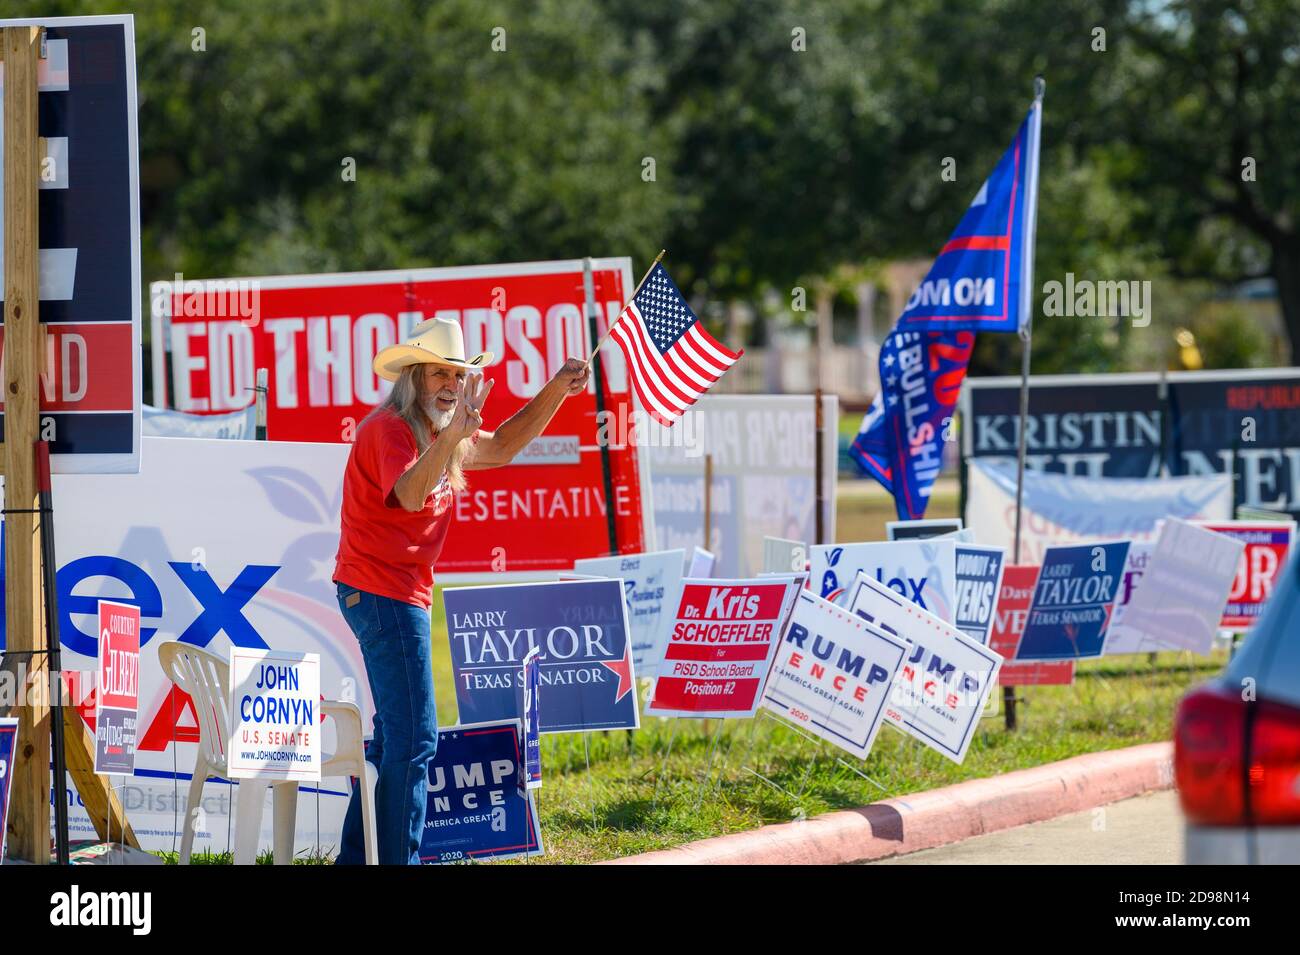 Pearland, Texas, USA. 3rd Nov, 2020. Trump supporter chants “Four more years,” on Nov. 3 outside the polling place in Brazoria County, Pearland, Texas, USA. Credit: Michelmond/Alamy Live News. Stock Photo